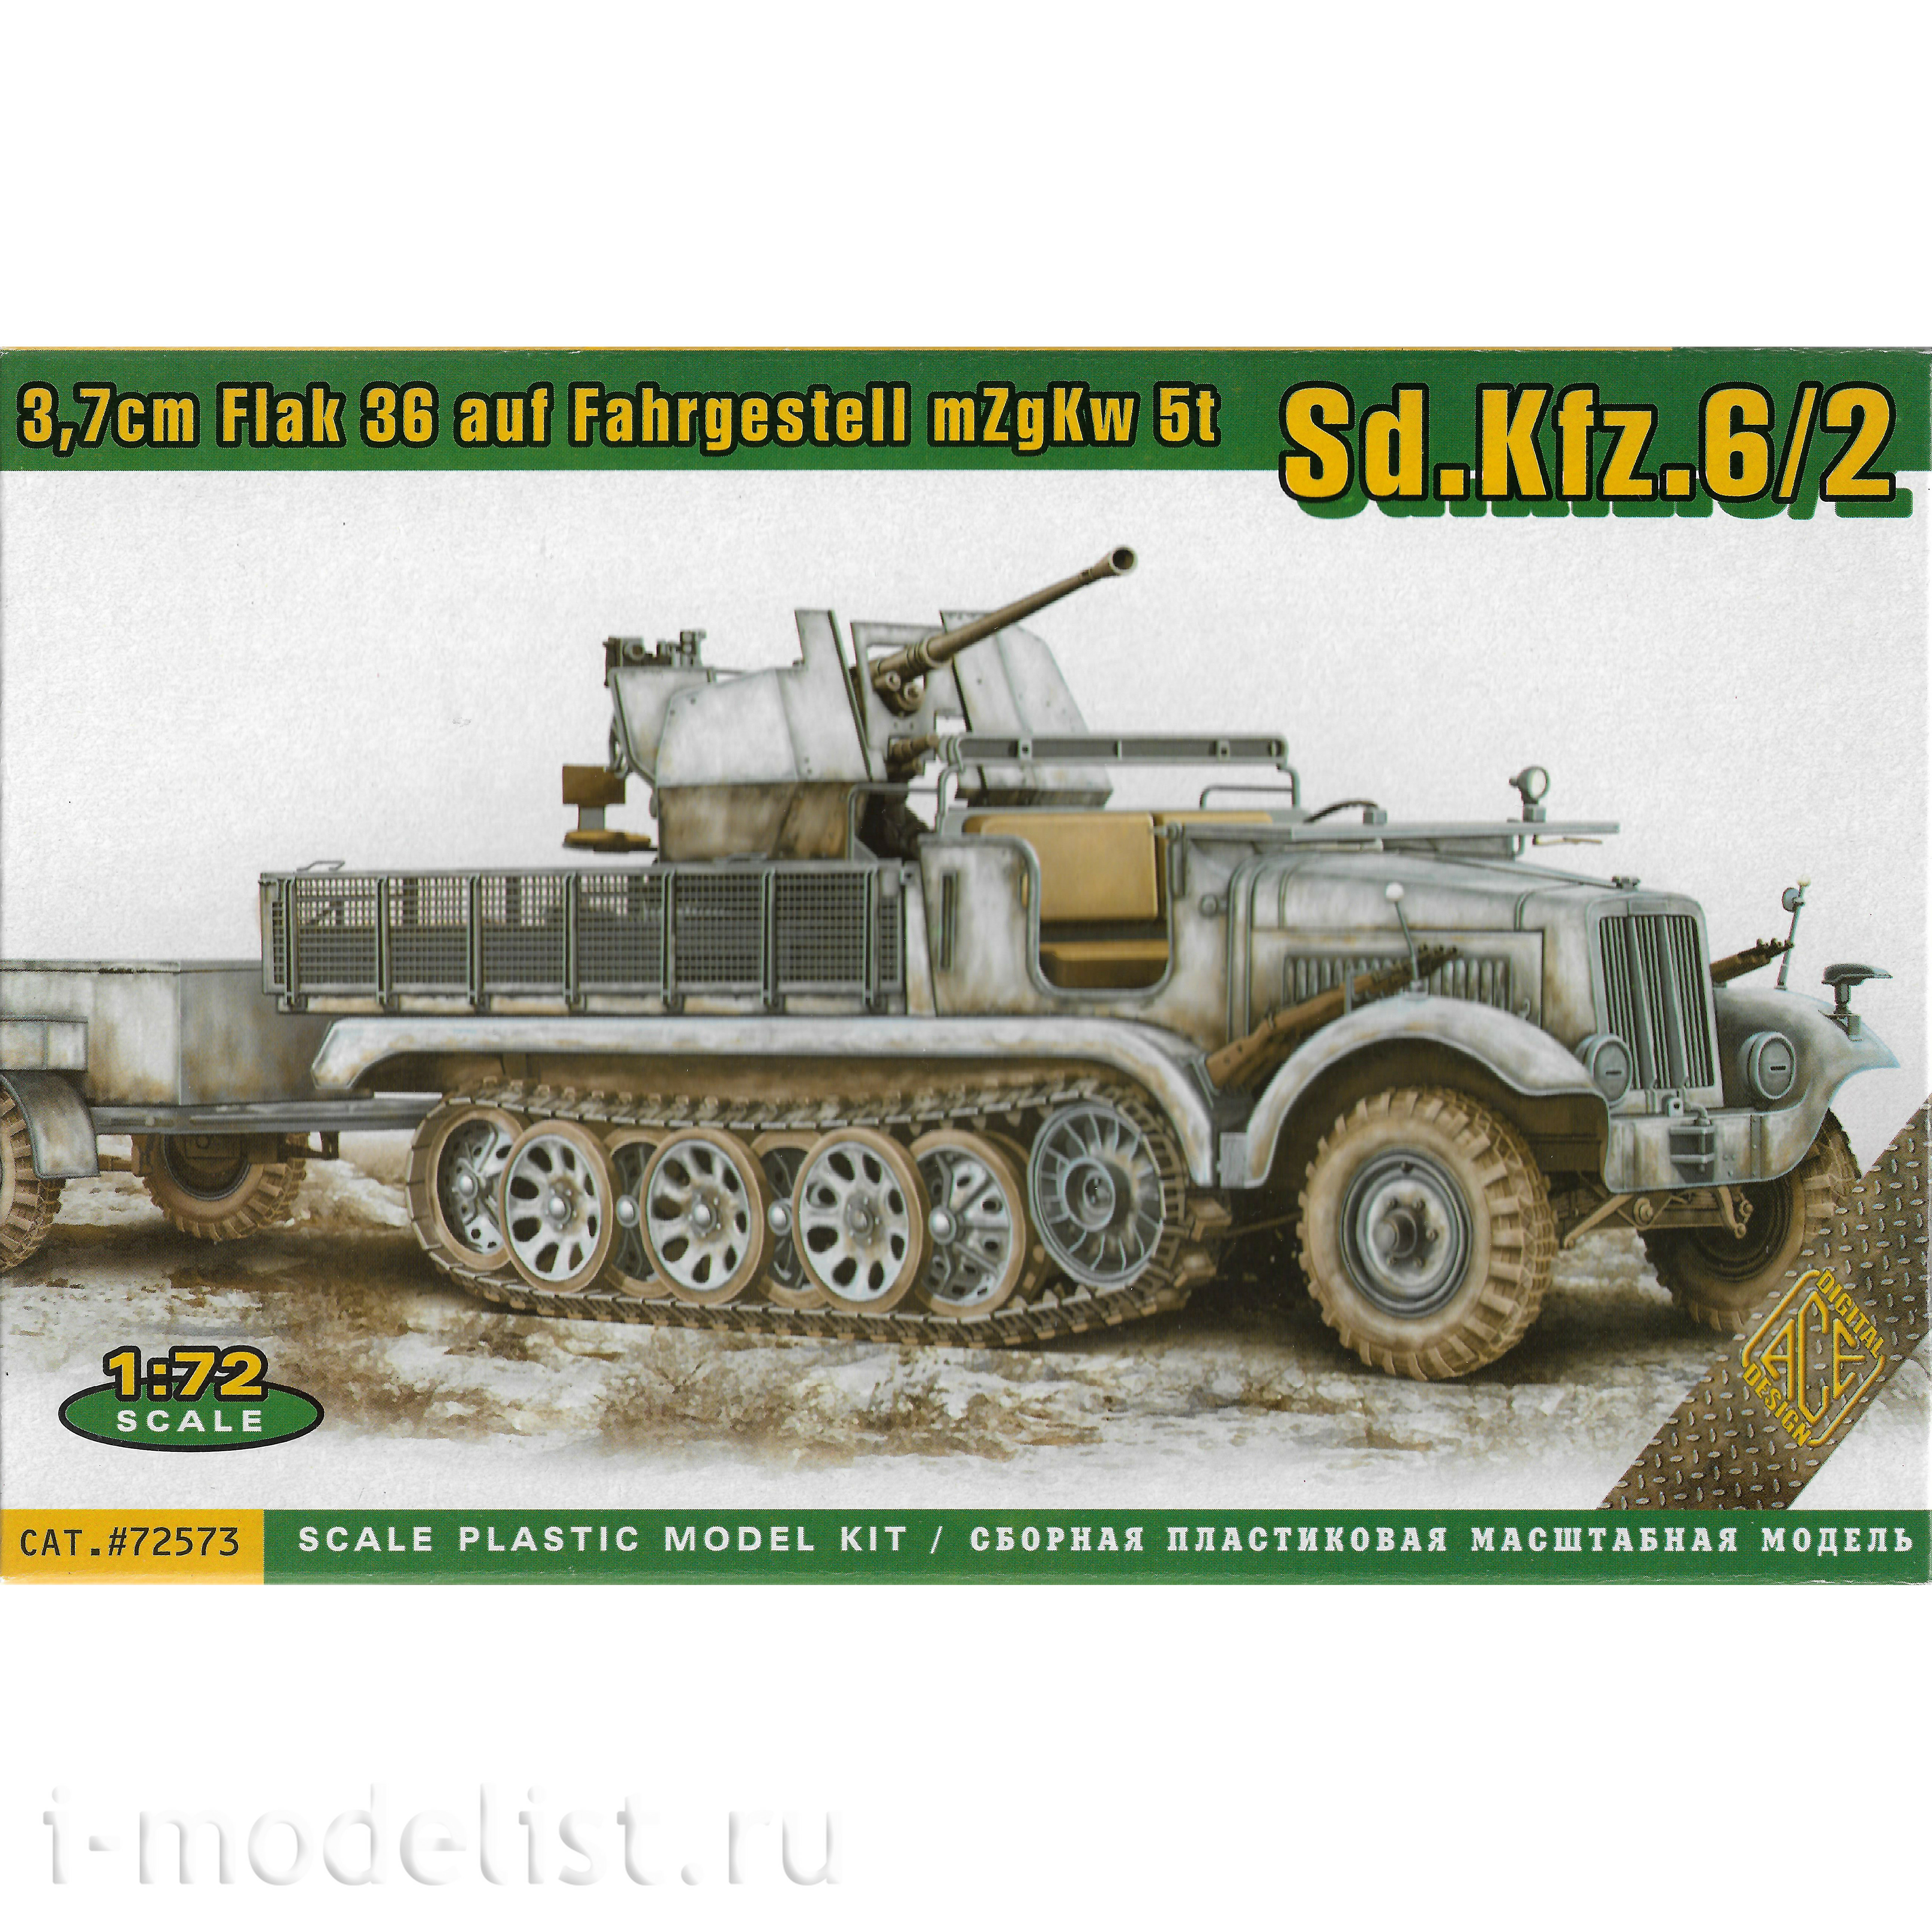 72573 ACE 1/72 37 mm Flak 36 anti-aircraft gun based on the Sd.Kfz.6 tractor